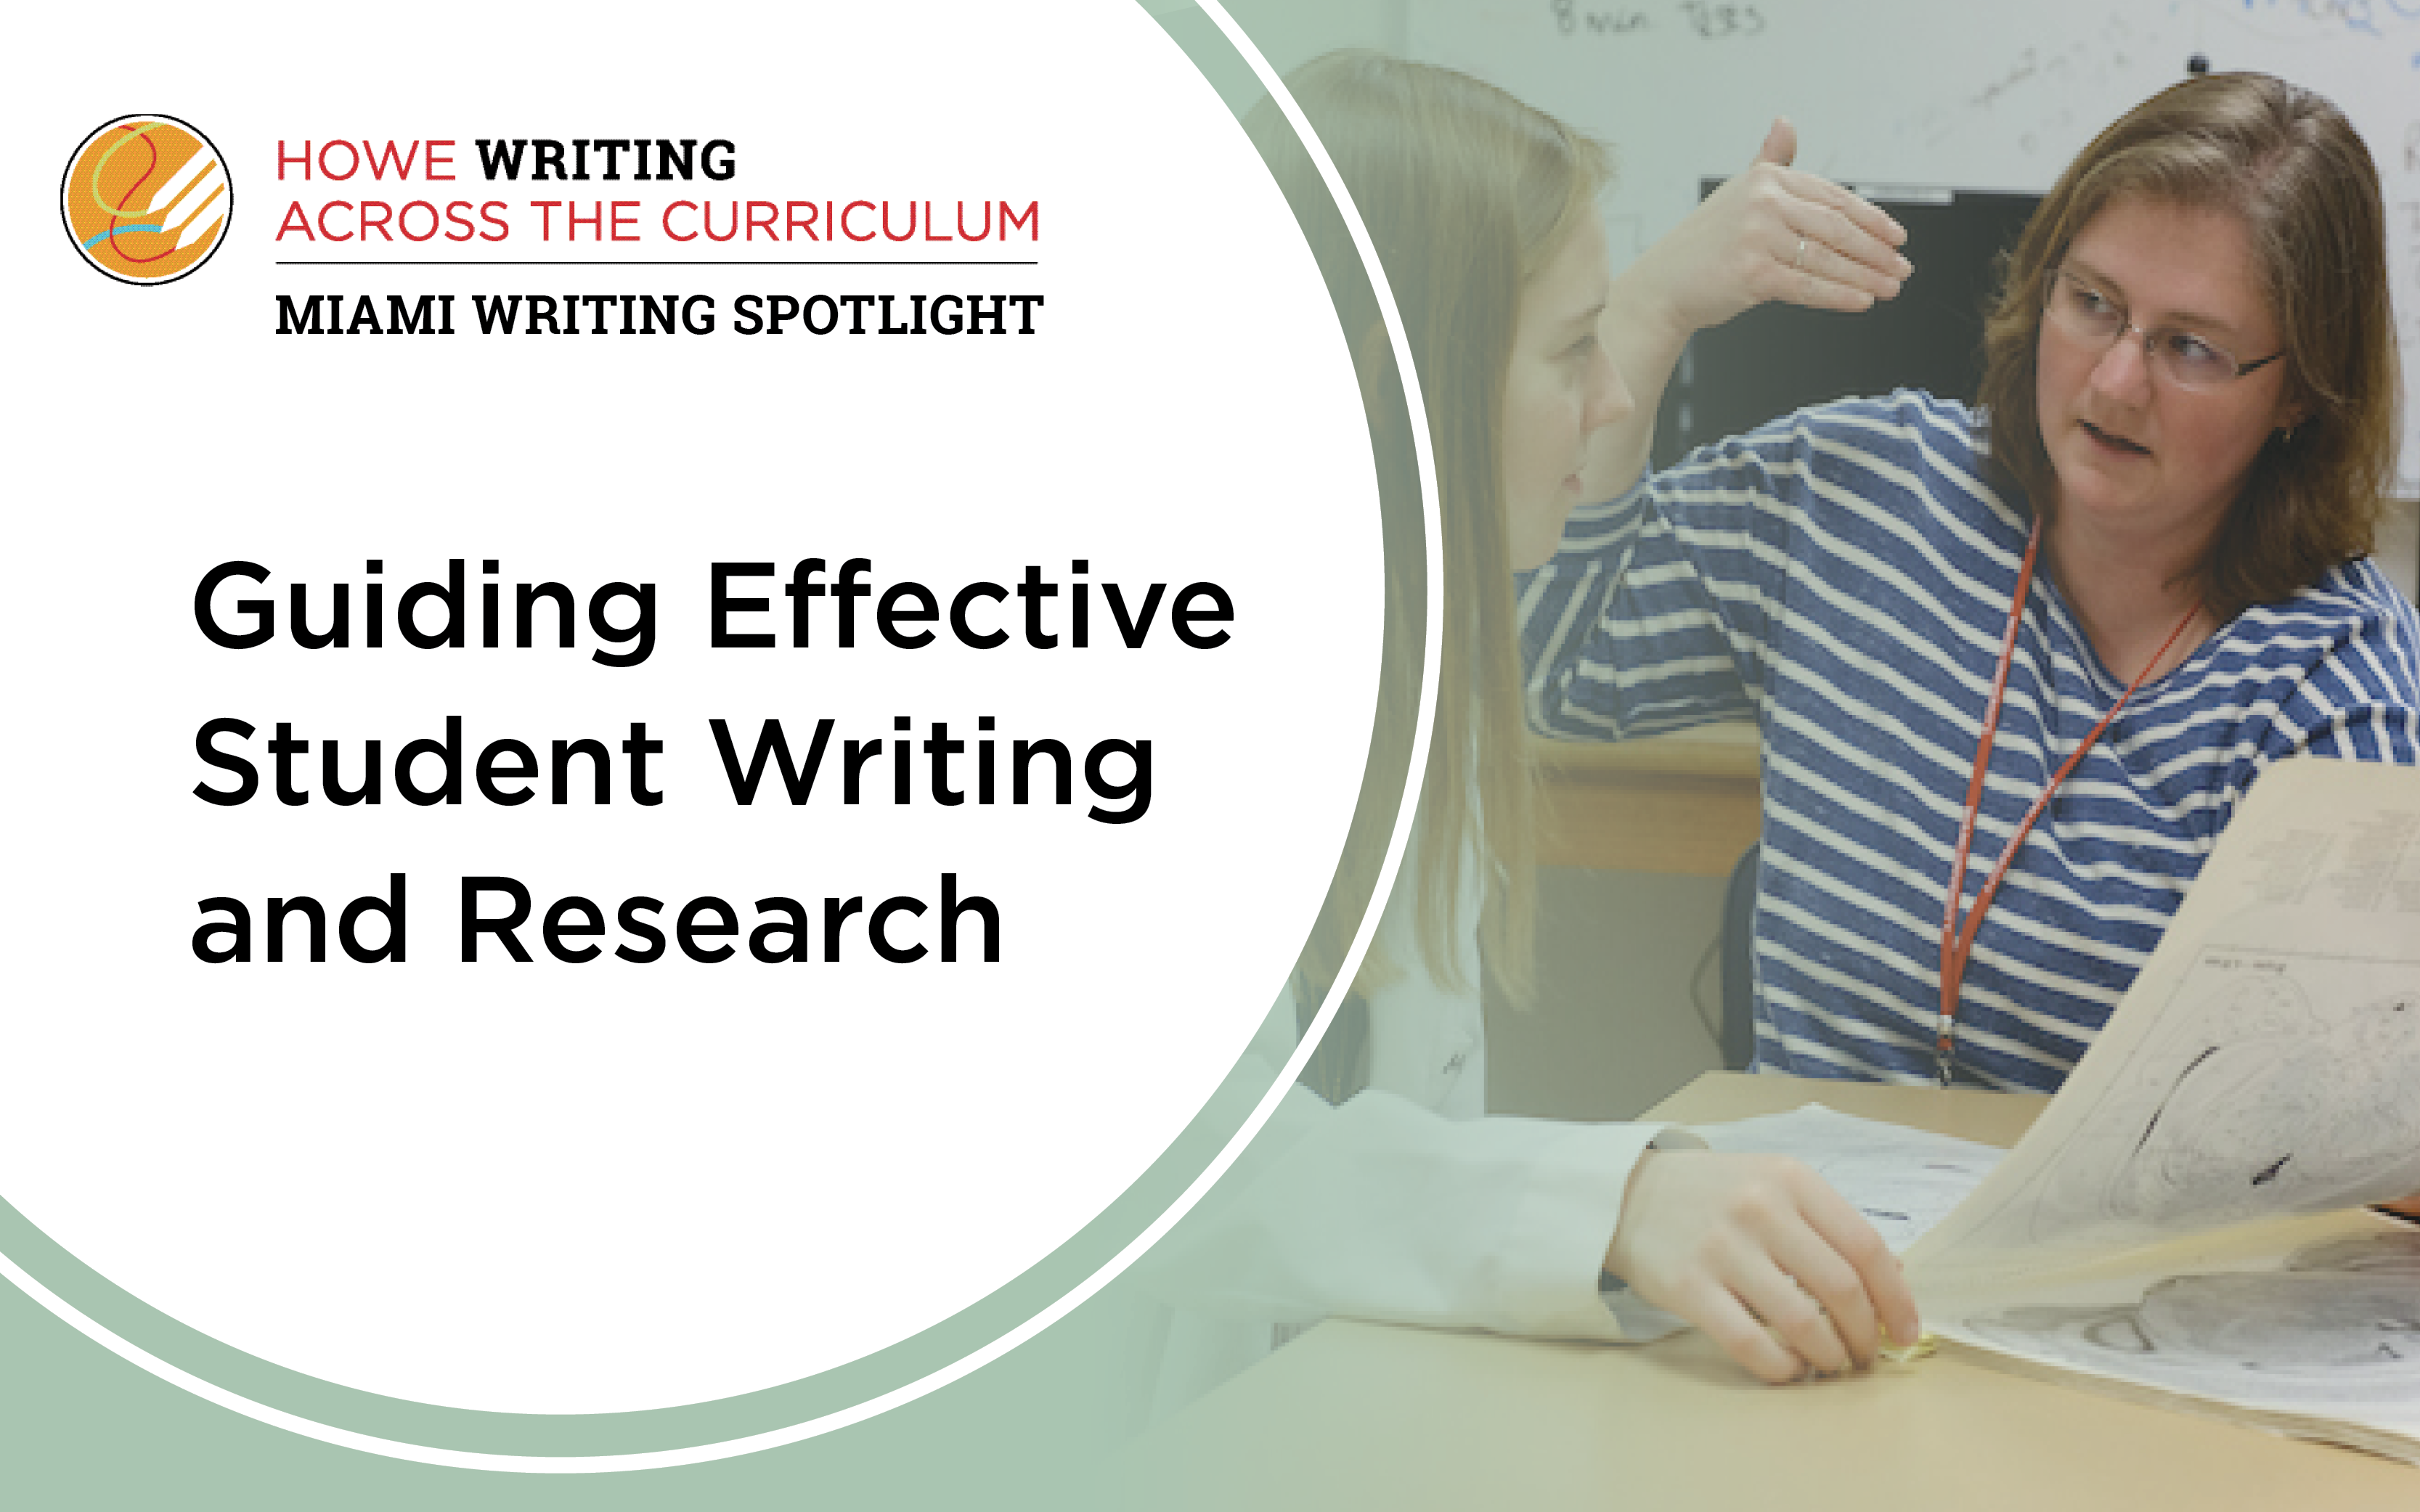 Click to read Miami Writing Spotlight on "Teaching Writing as a  Developmental Process  in Psychology: Guiding Effective Student Writing and Research"   